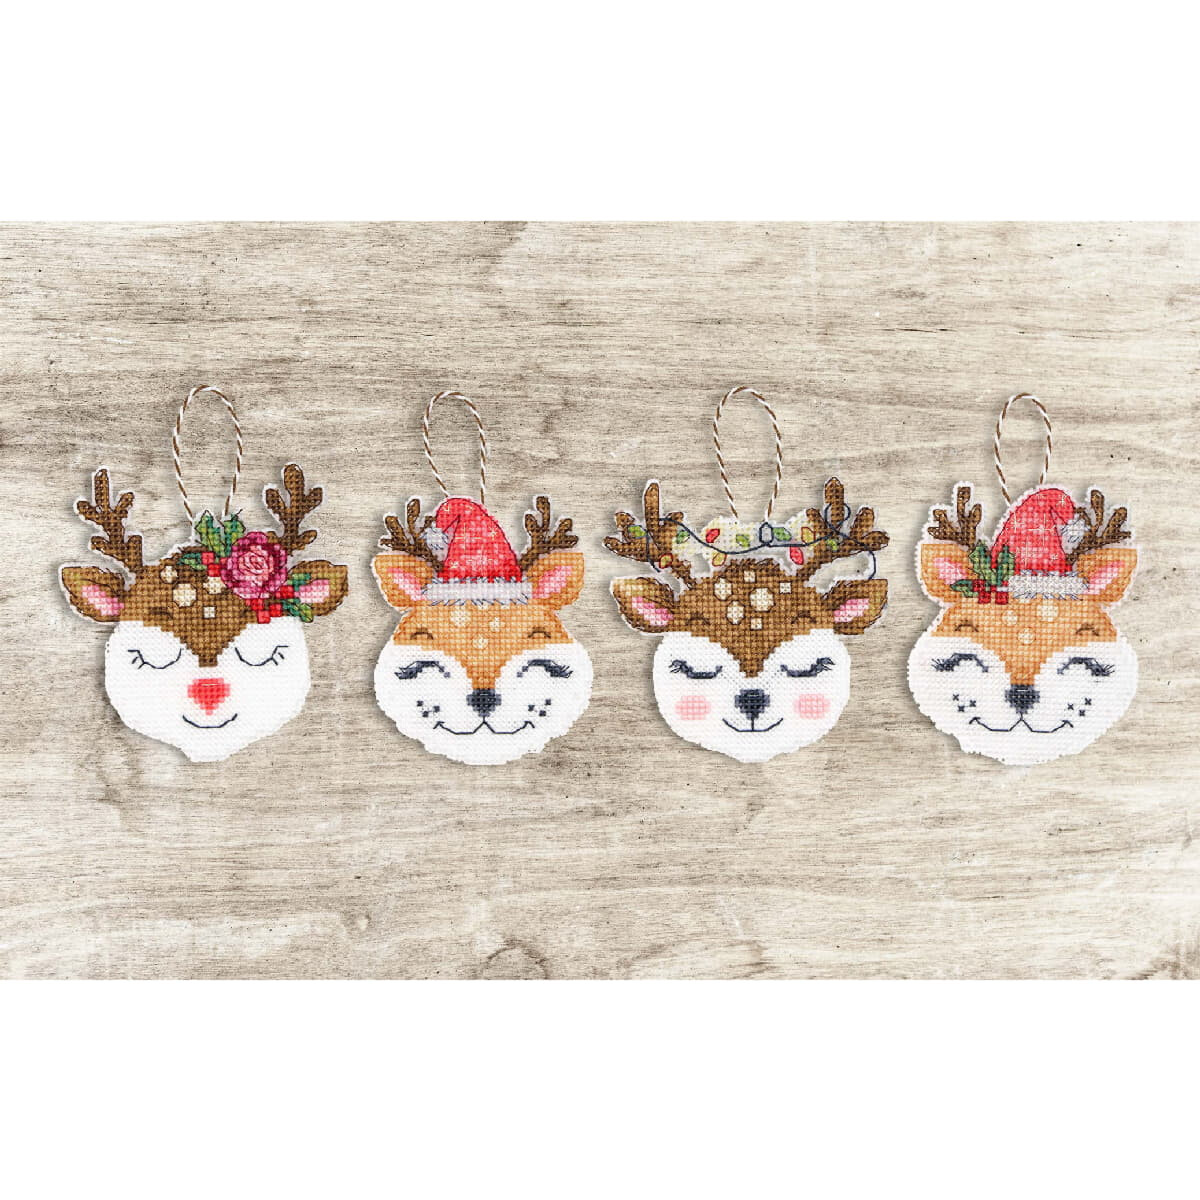 Four festive reindeer ornaments in cross stitch on a...